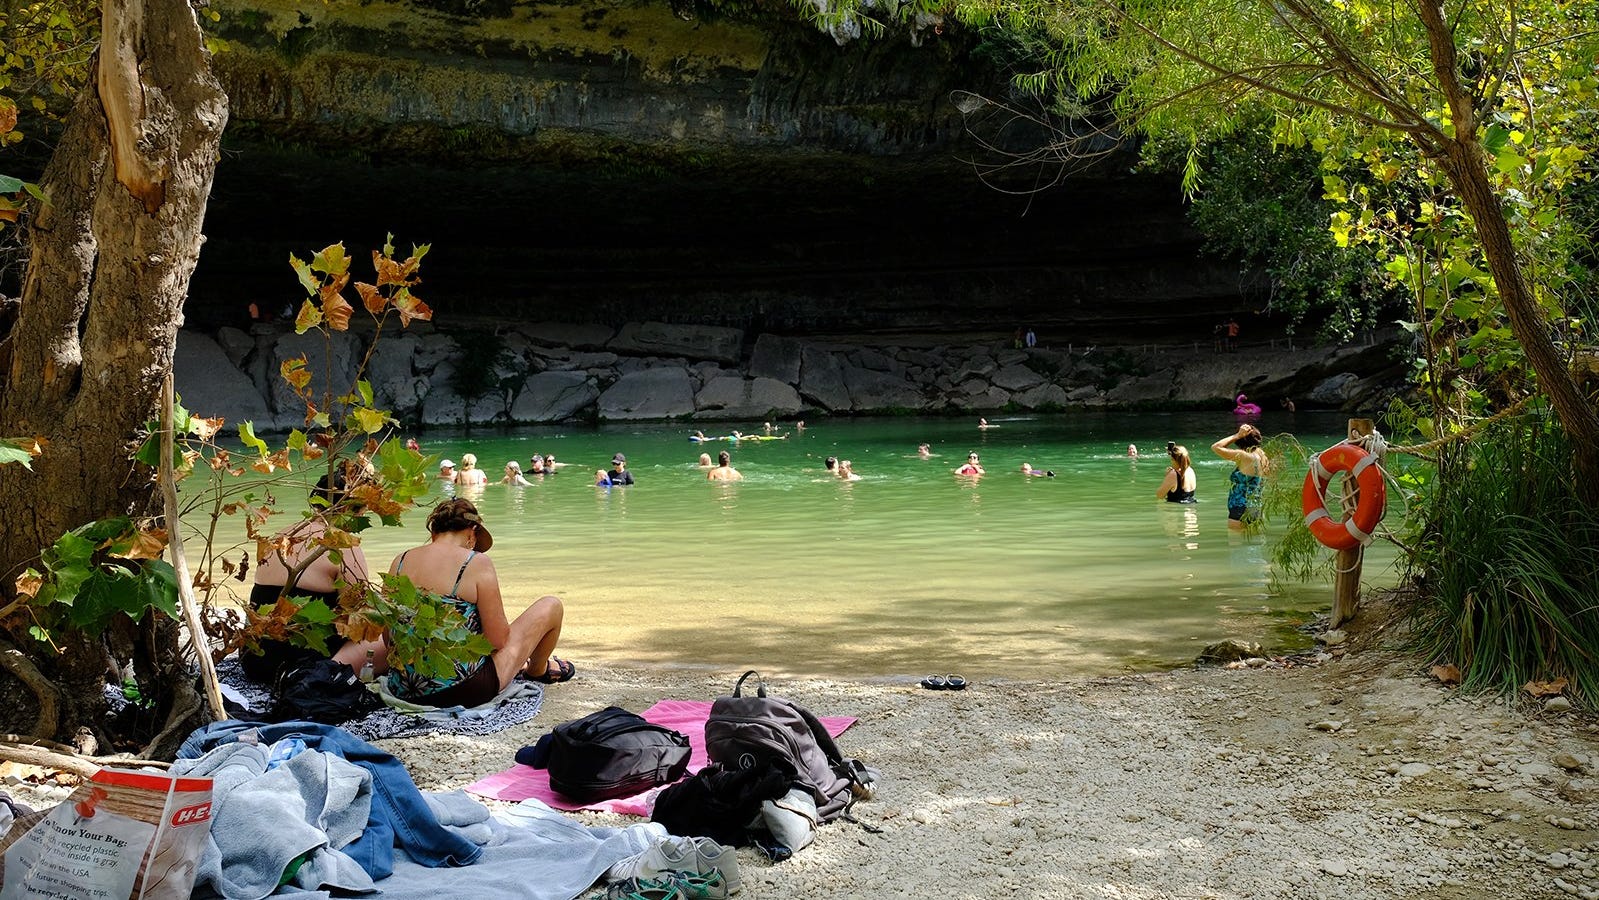 Is Hamilton Pool open? Swimming hole near Austin closed after freeze